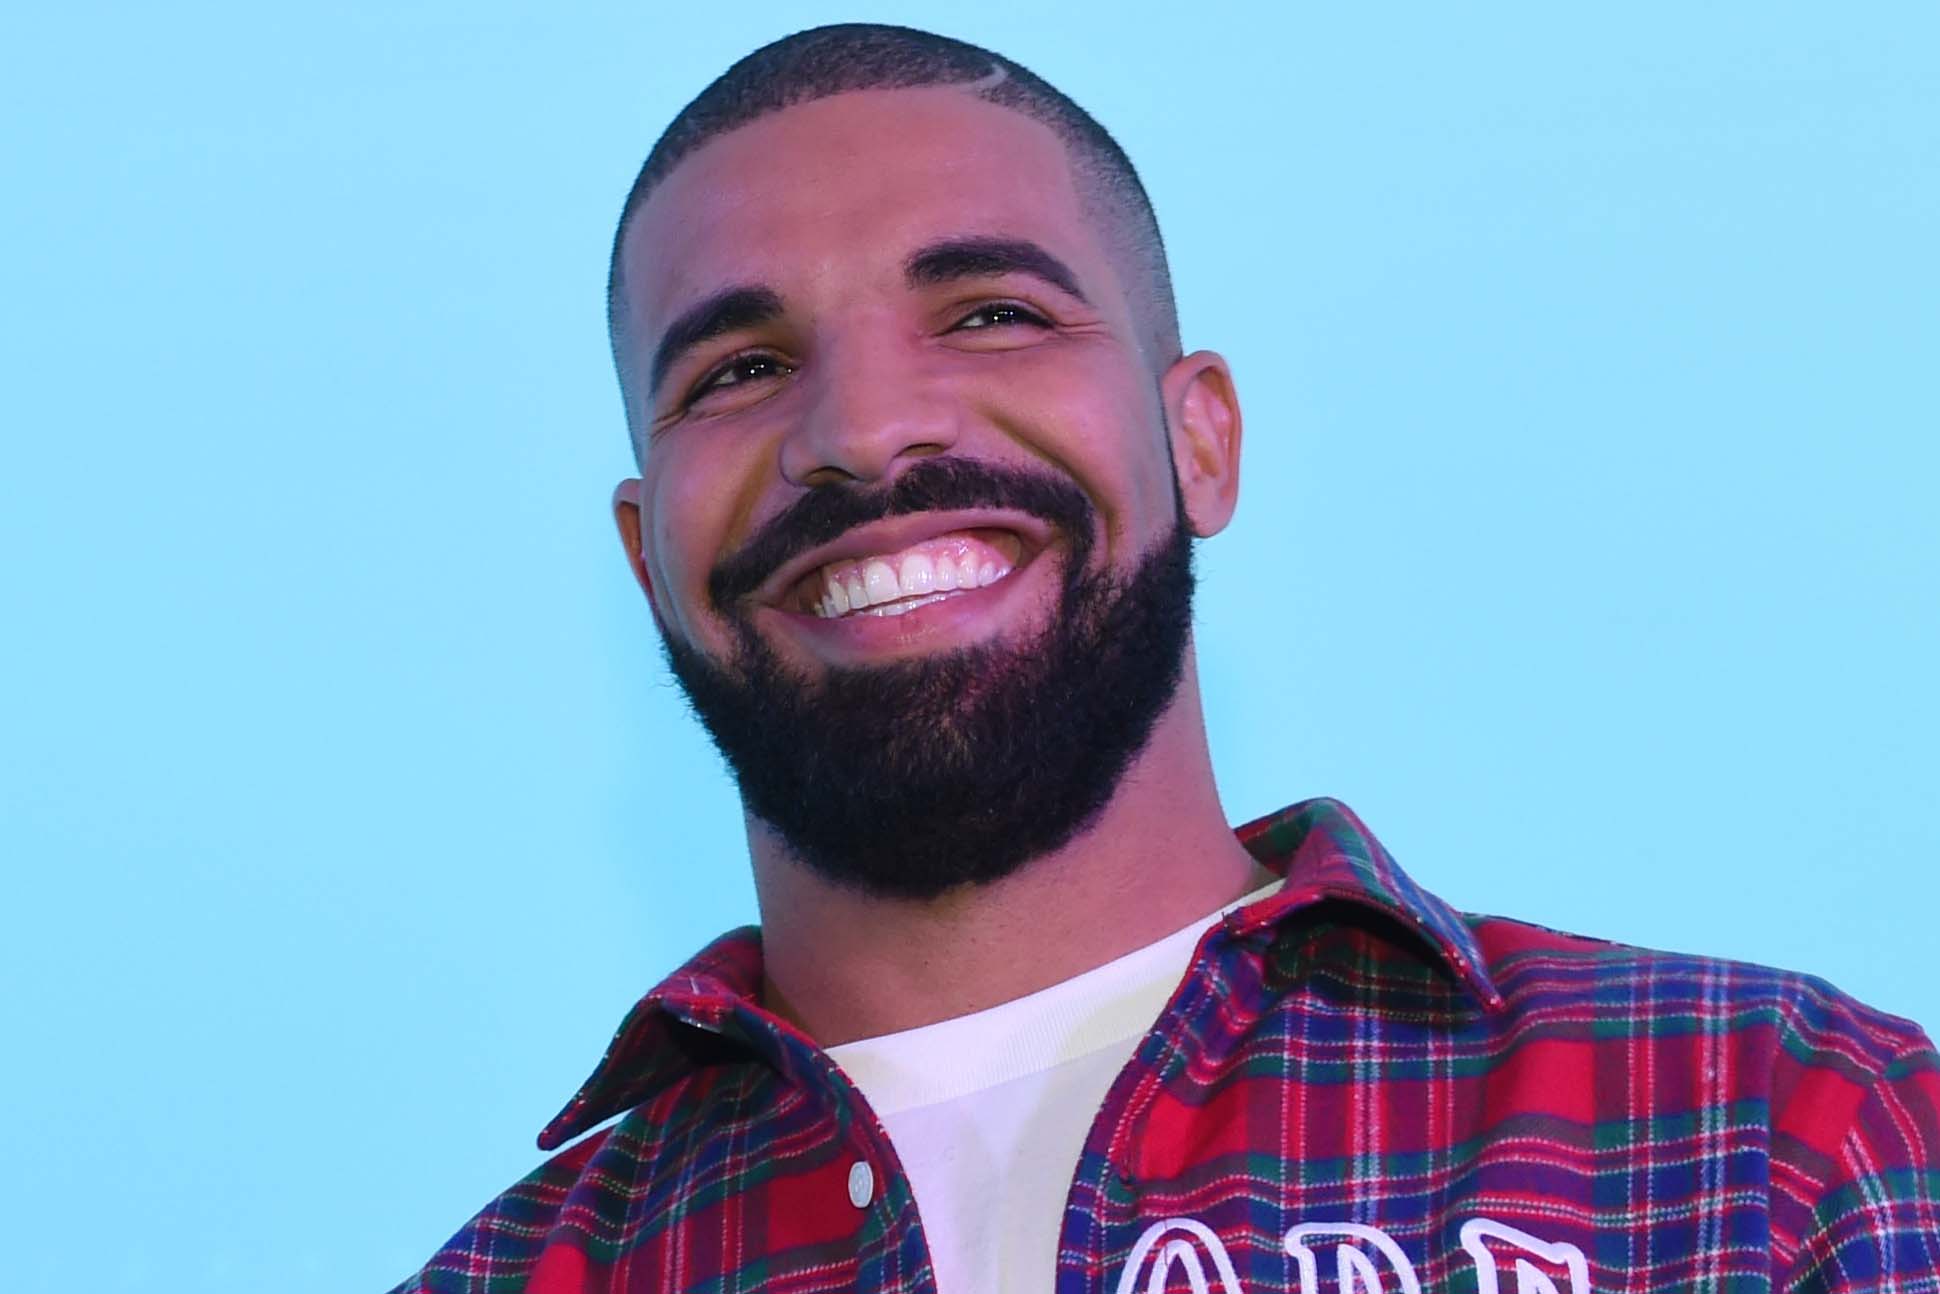 Drake smiling because he's great at telling stories with data